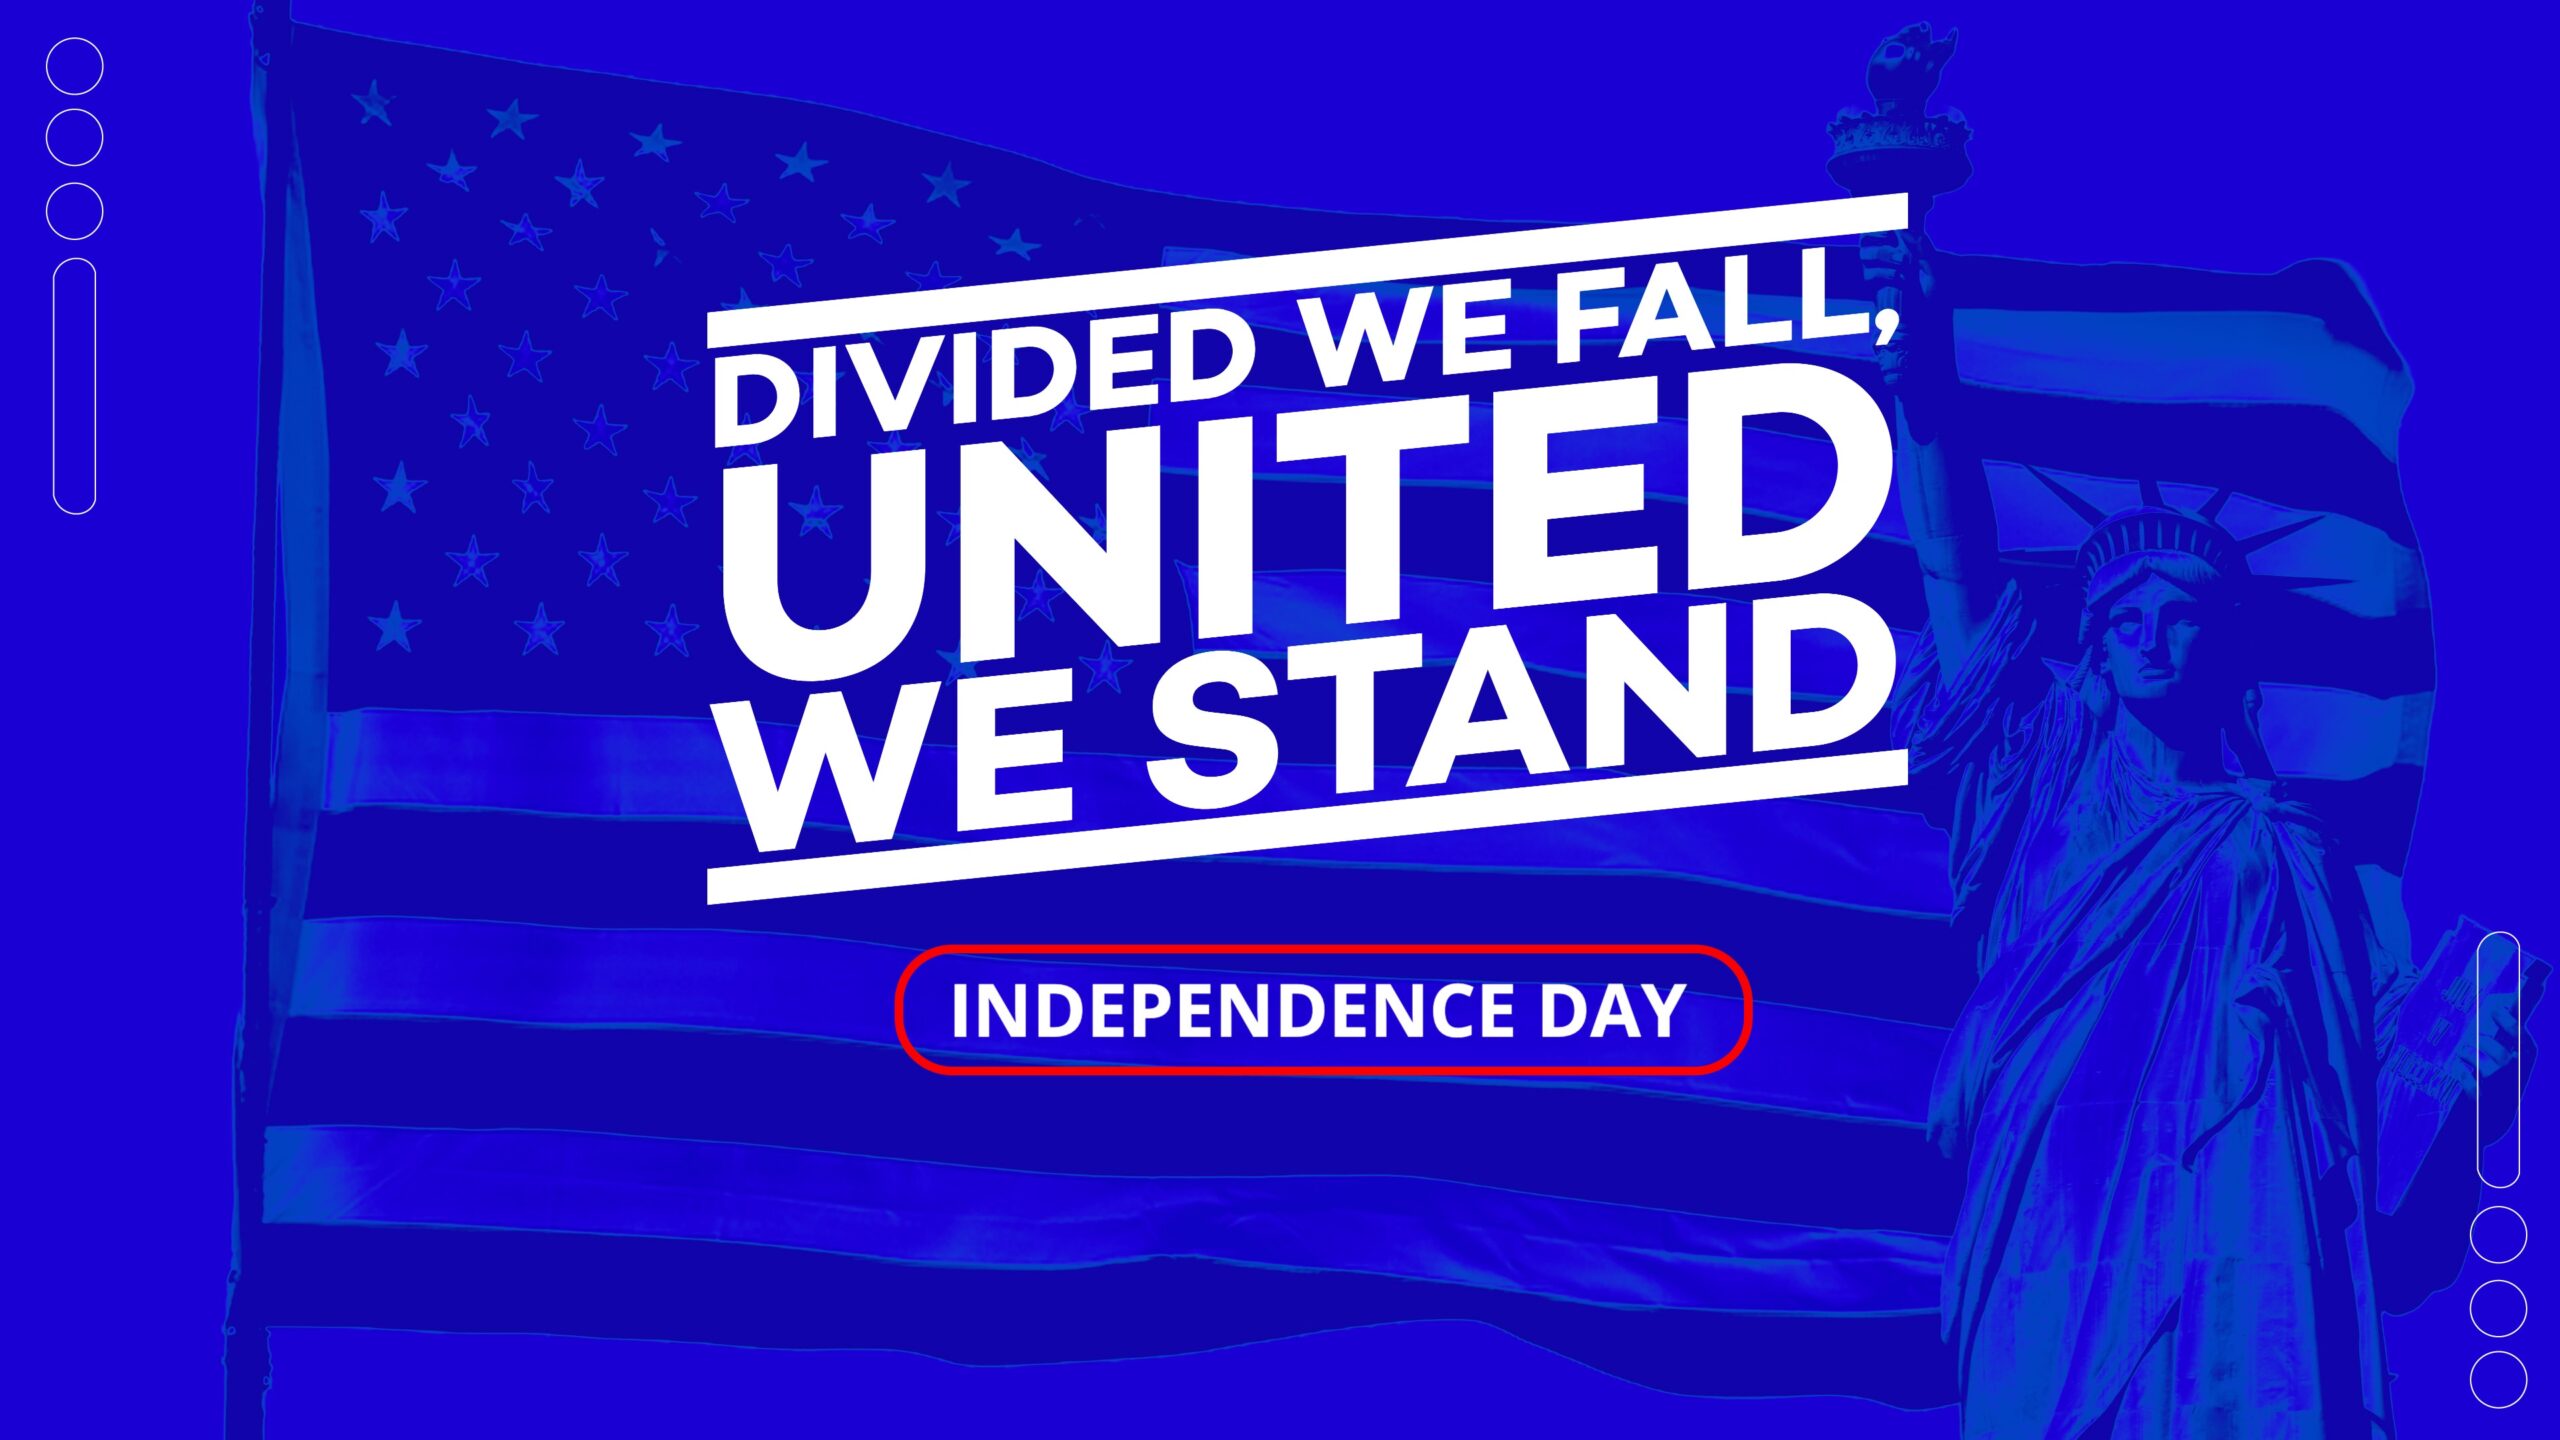 United We Stand, Divided We Fall